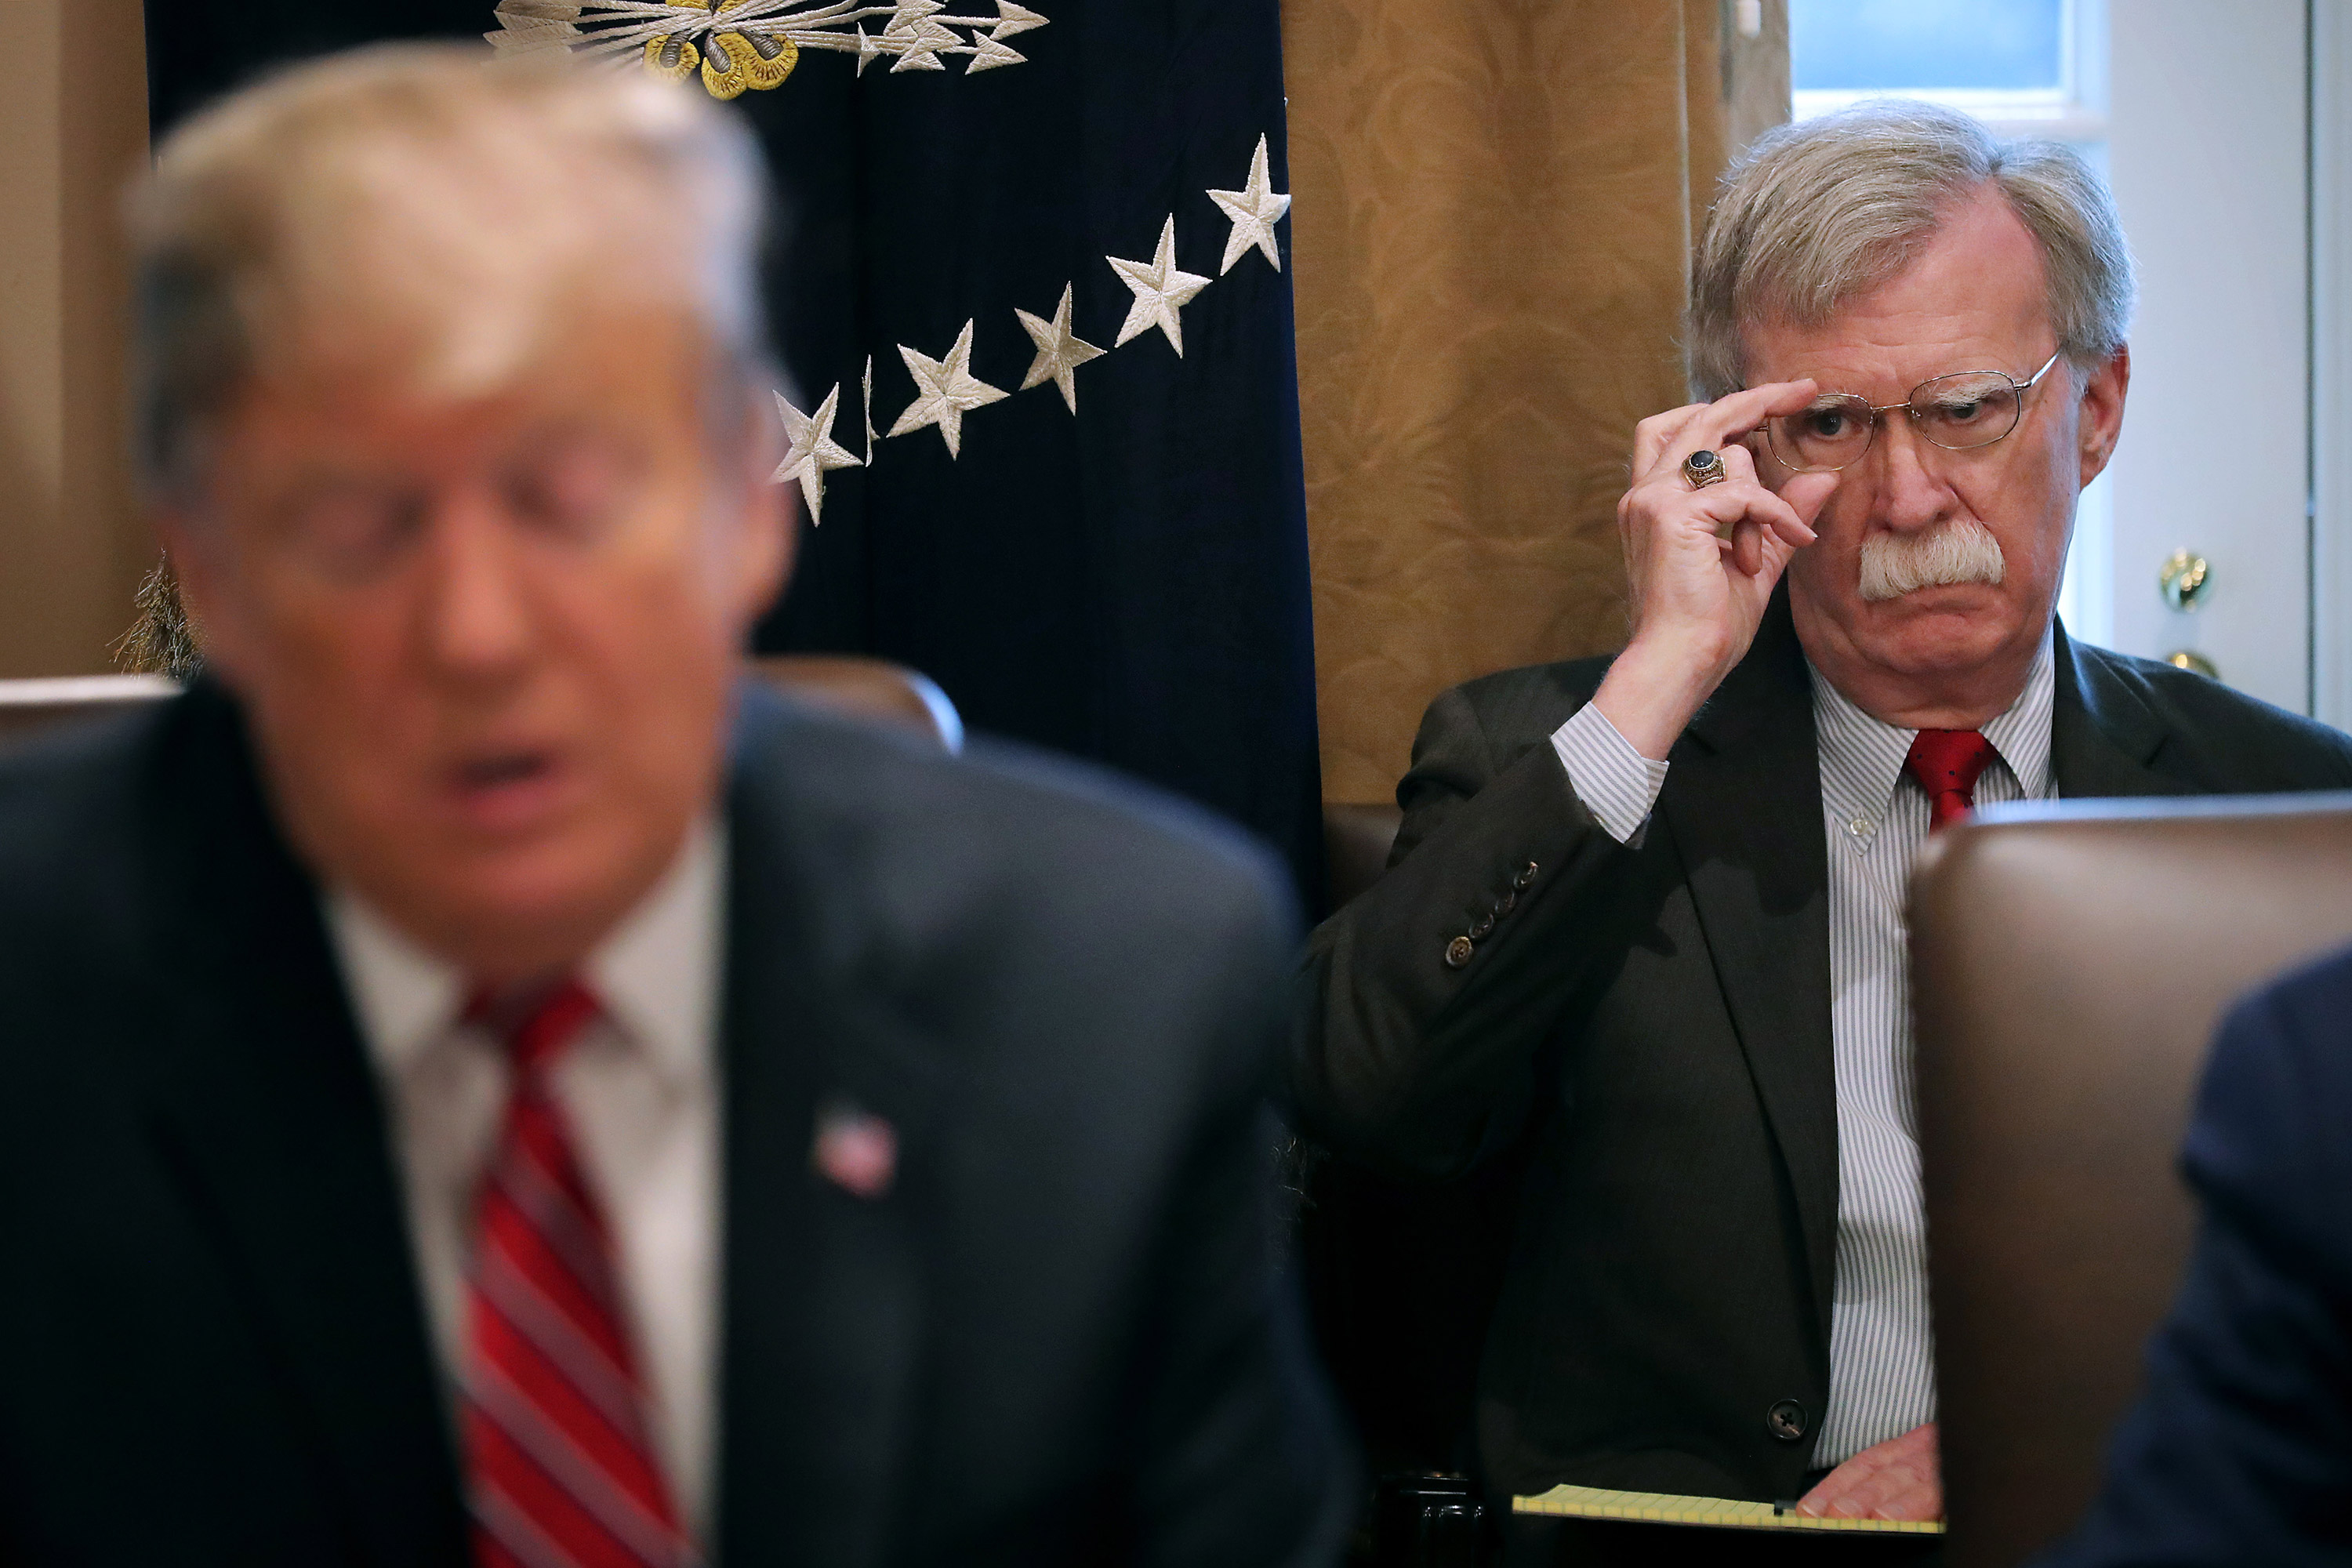 Trump and Bolton are debating how to handle the tensions.